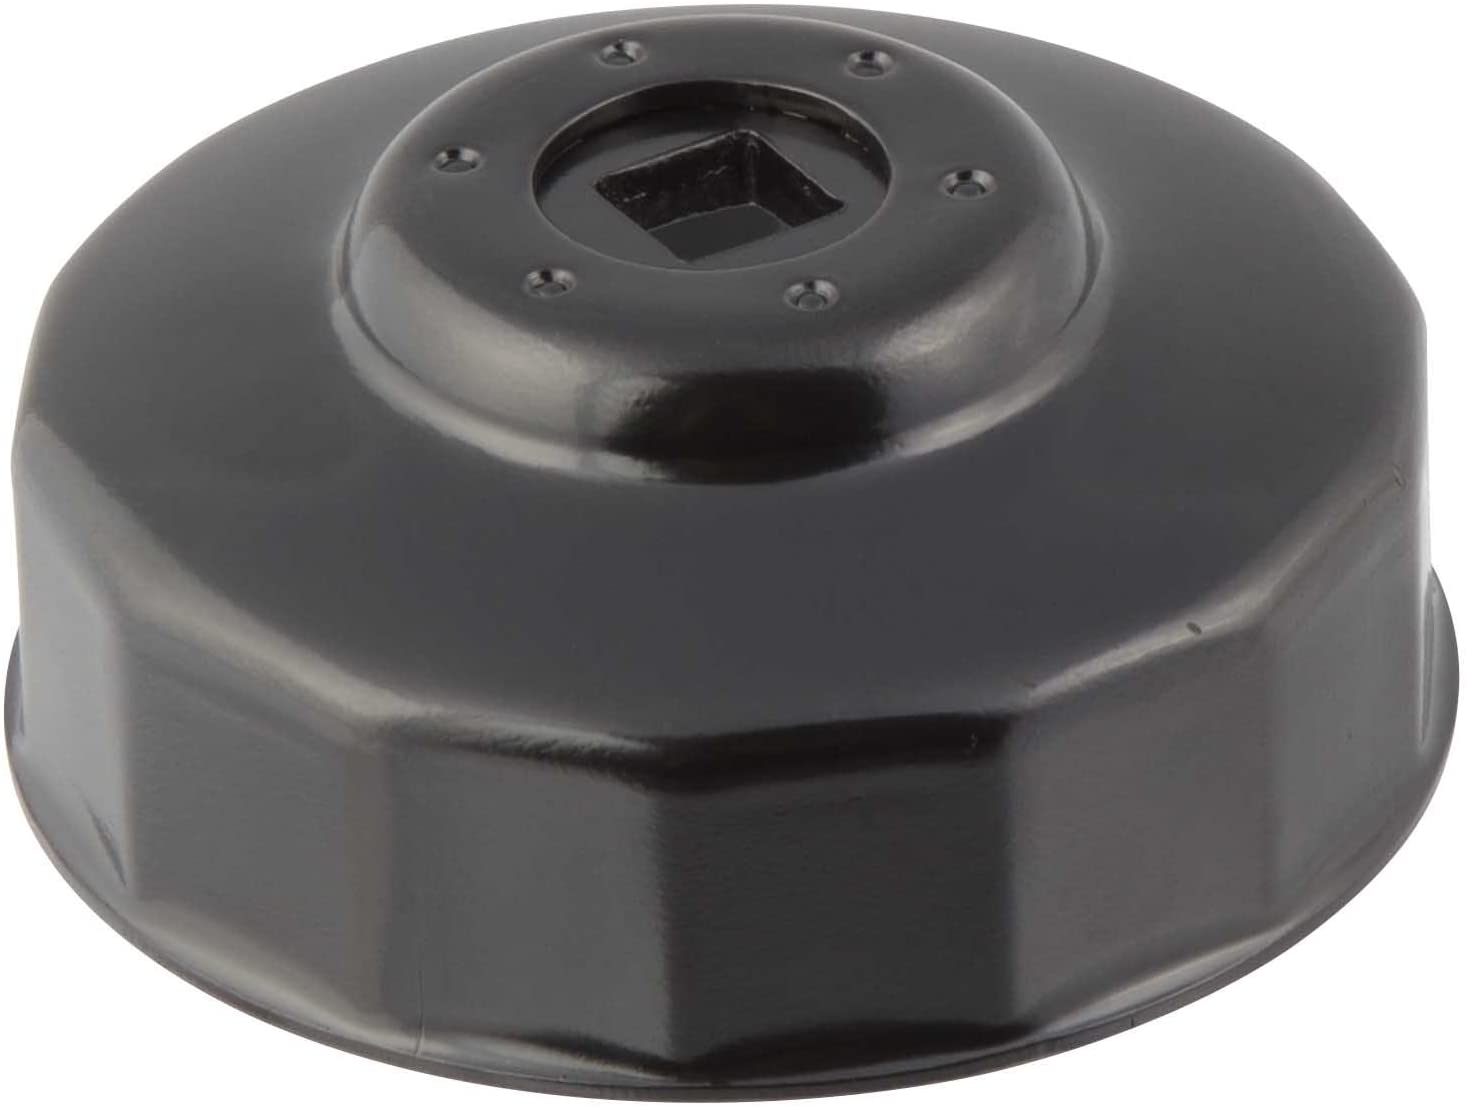 oil filter cap wrench